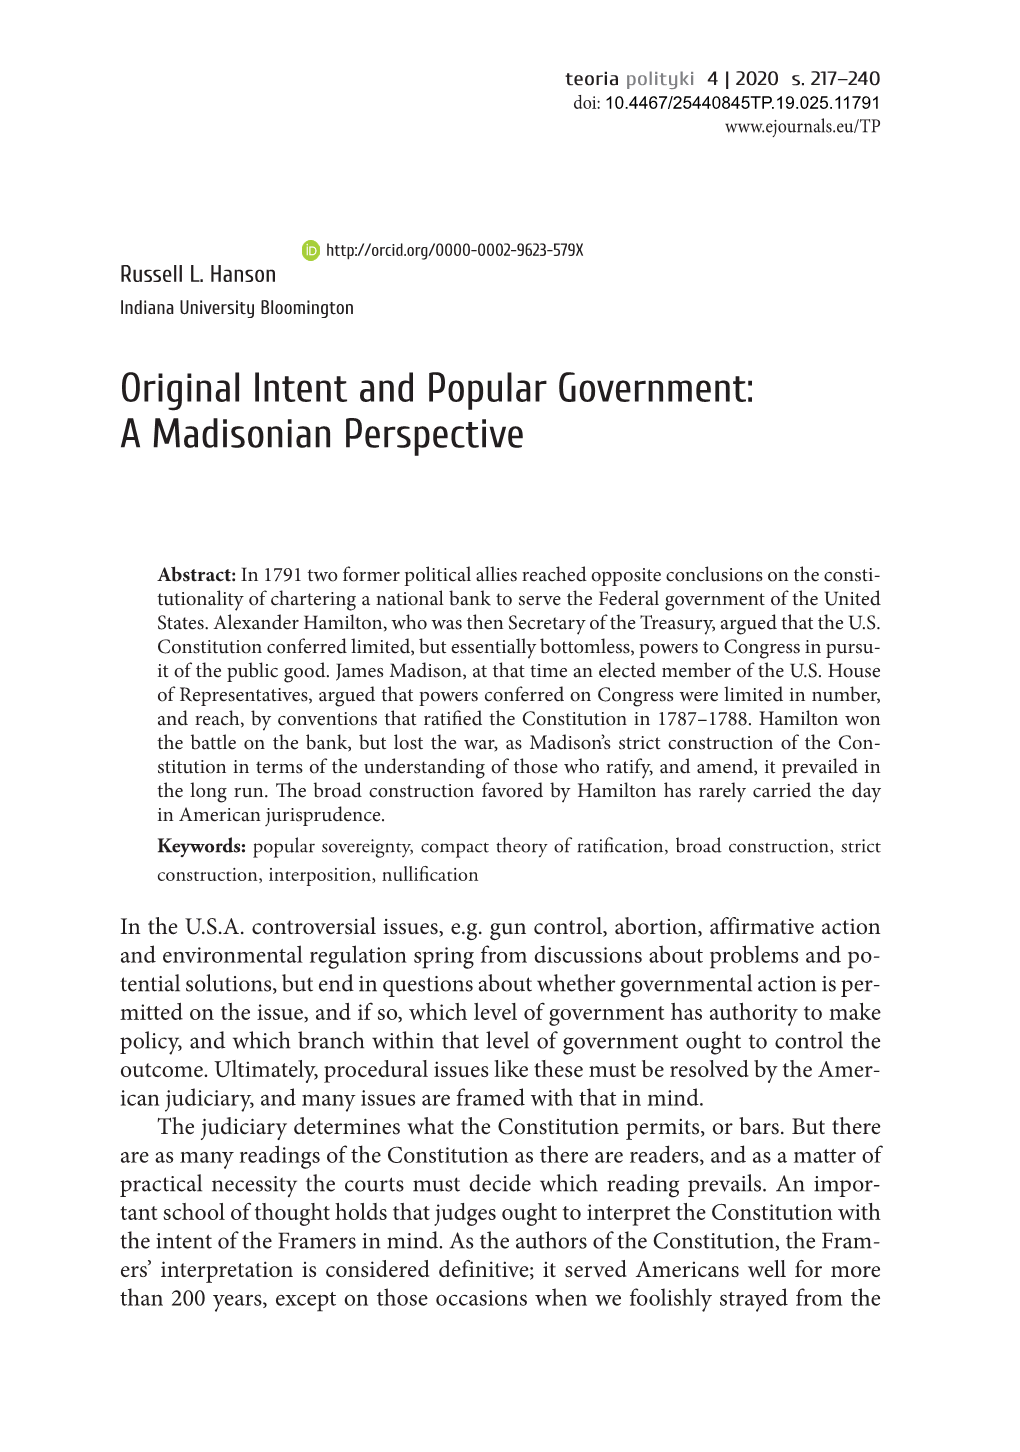 Original Intent and Popular Government: a Madisonian Perspective